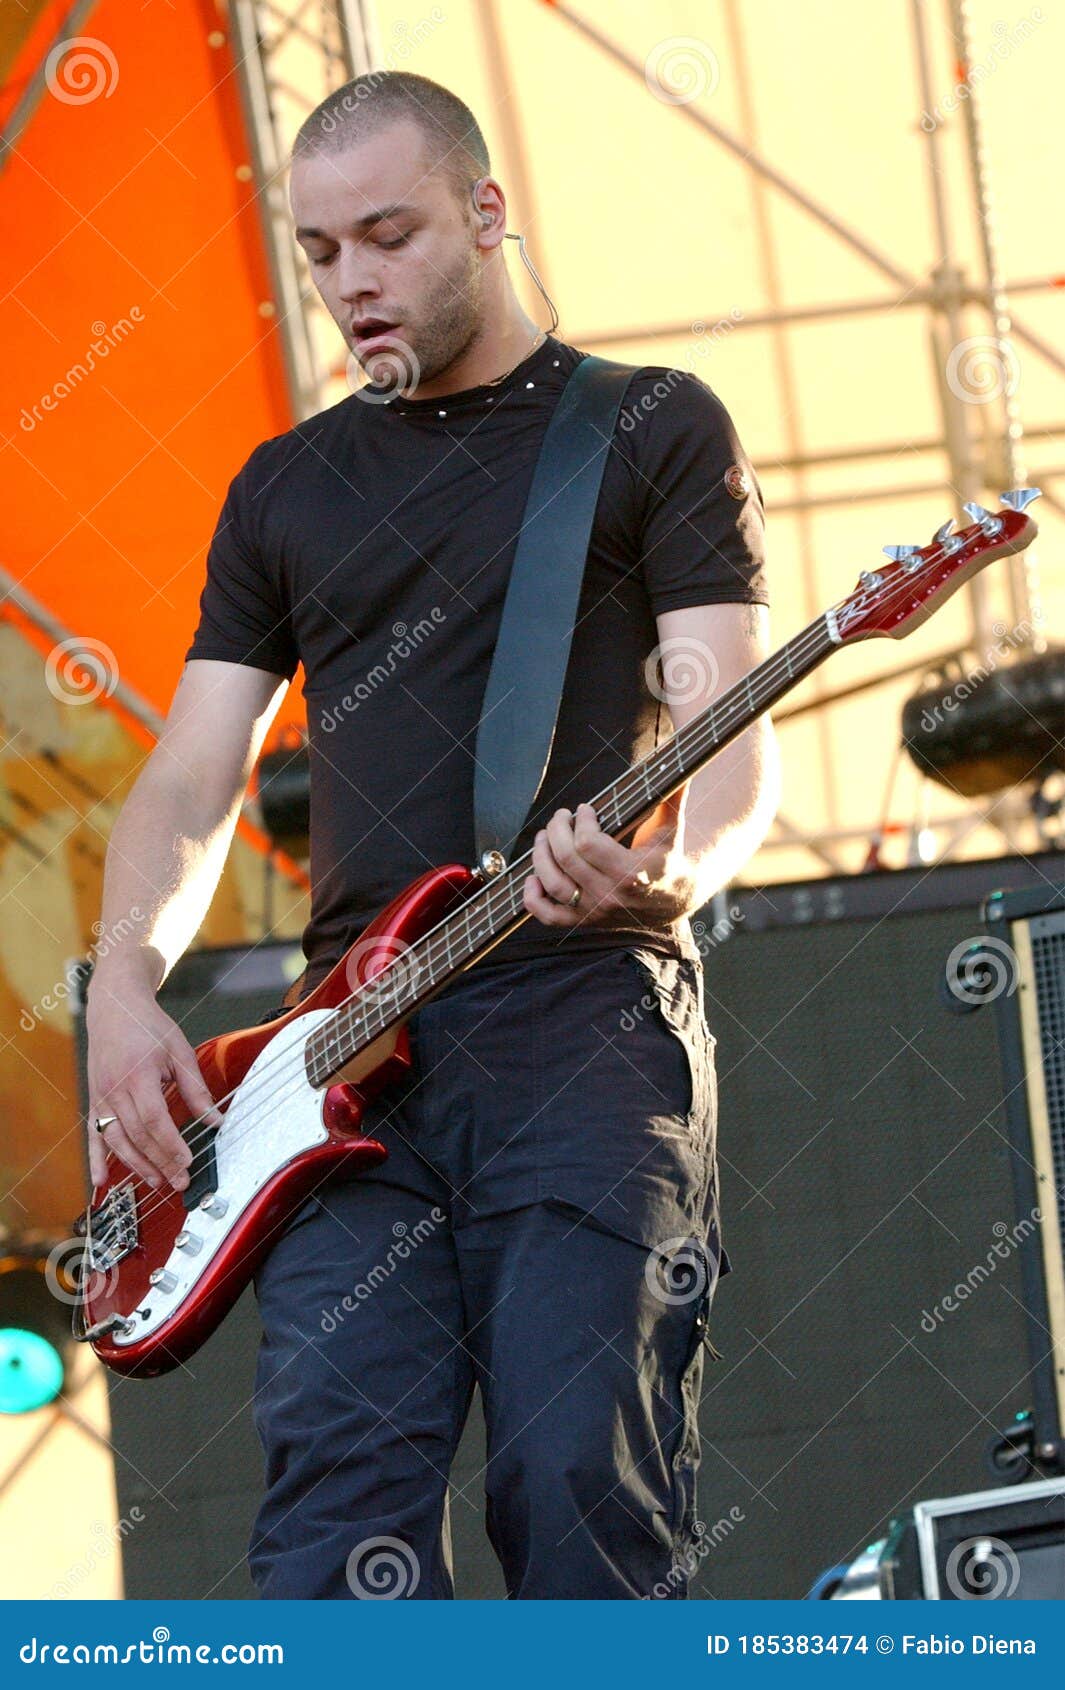 Chris Wolstenholme Of Muse During The Concert Editorial Stock Image Image Of Music Rock